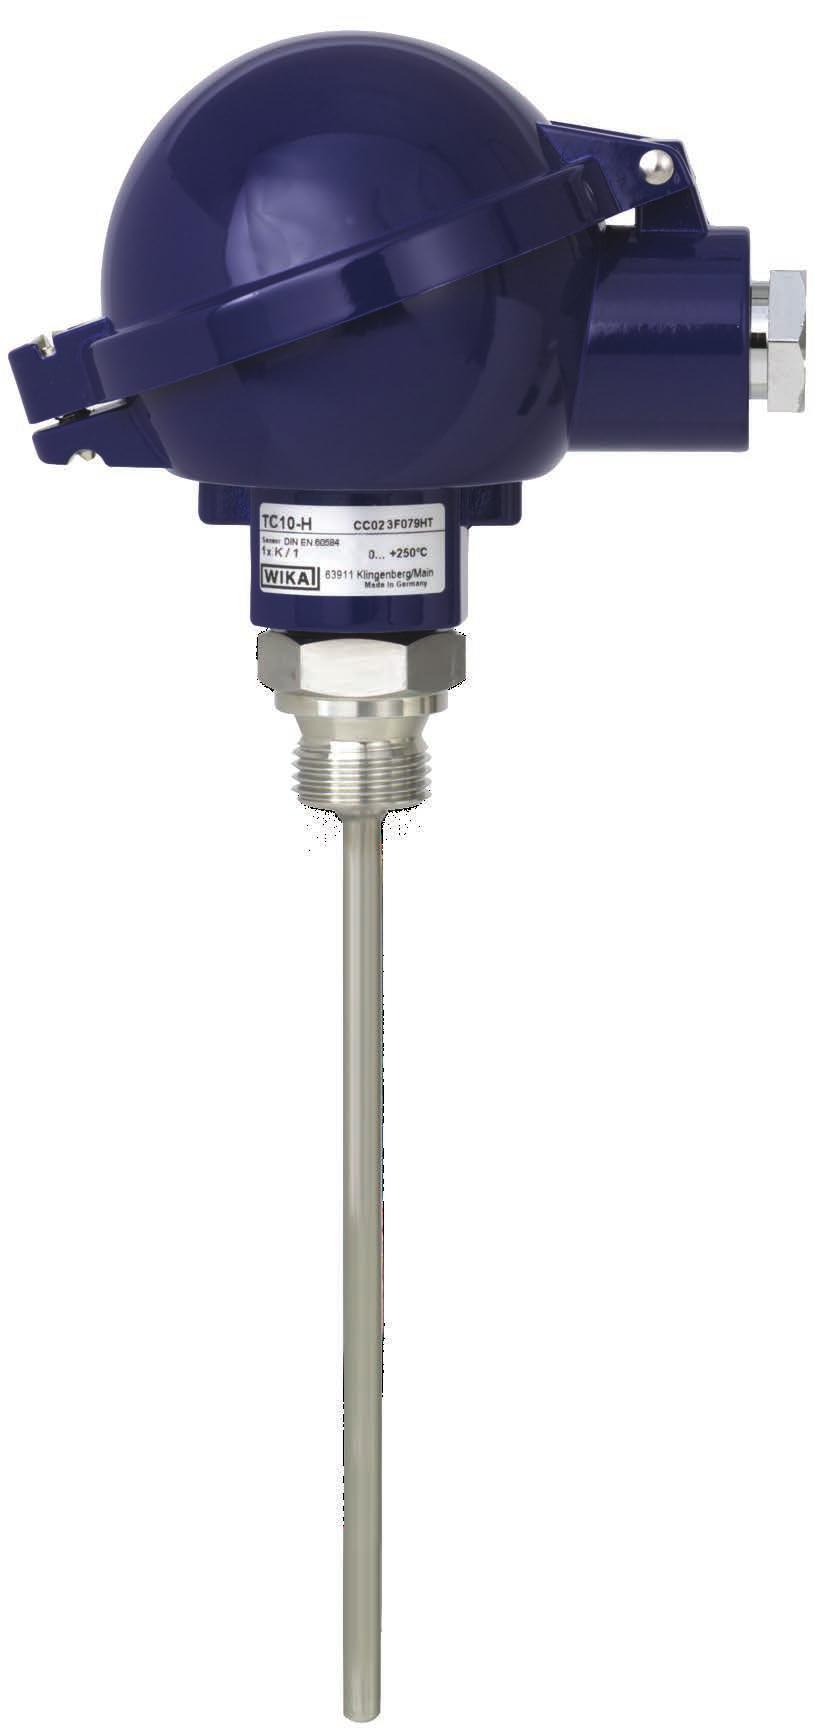 Electrical temperature measurement Thermocouple Model TC10-H without thermowell WIKA data sheet TE 65.